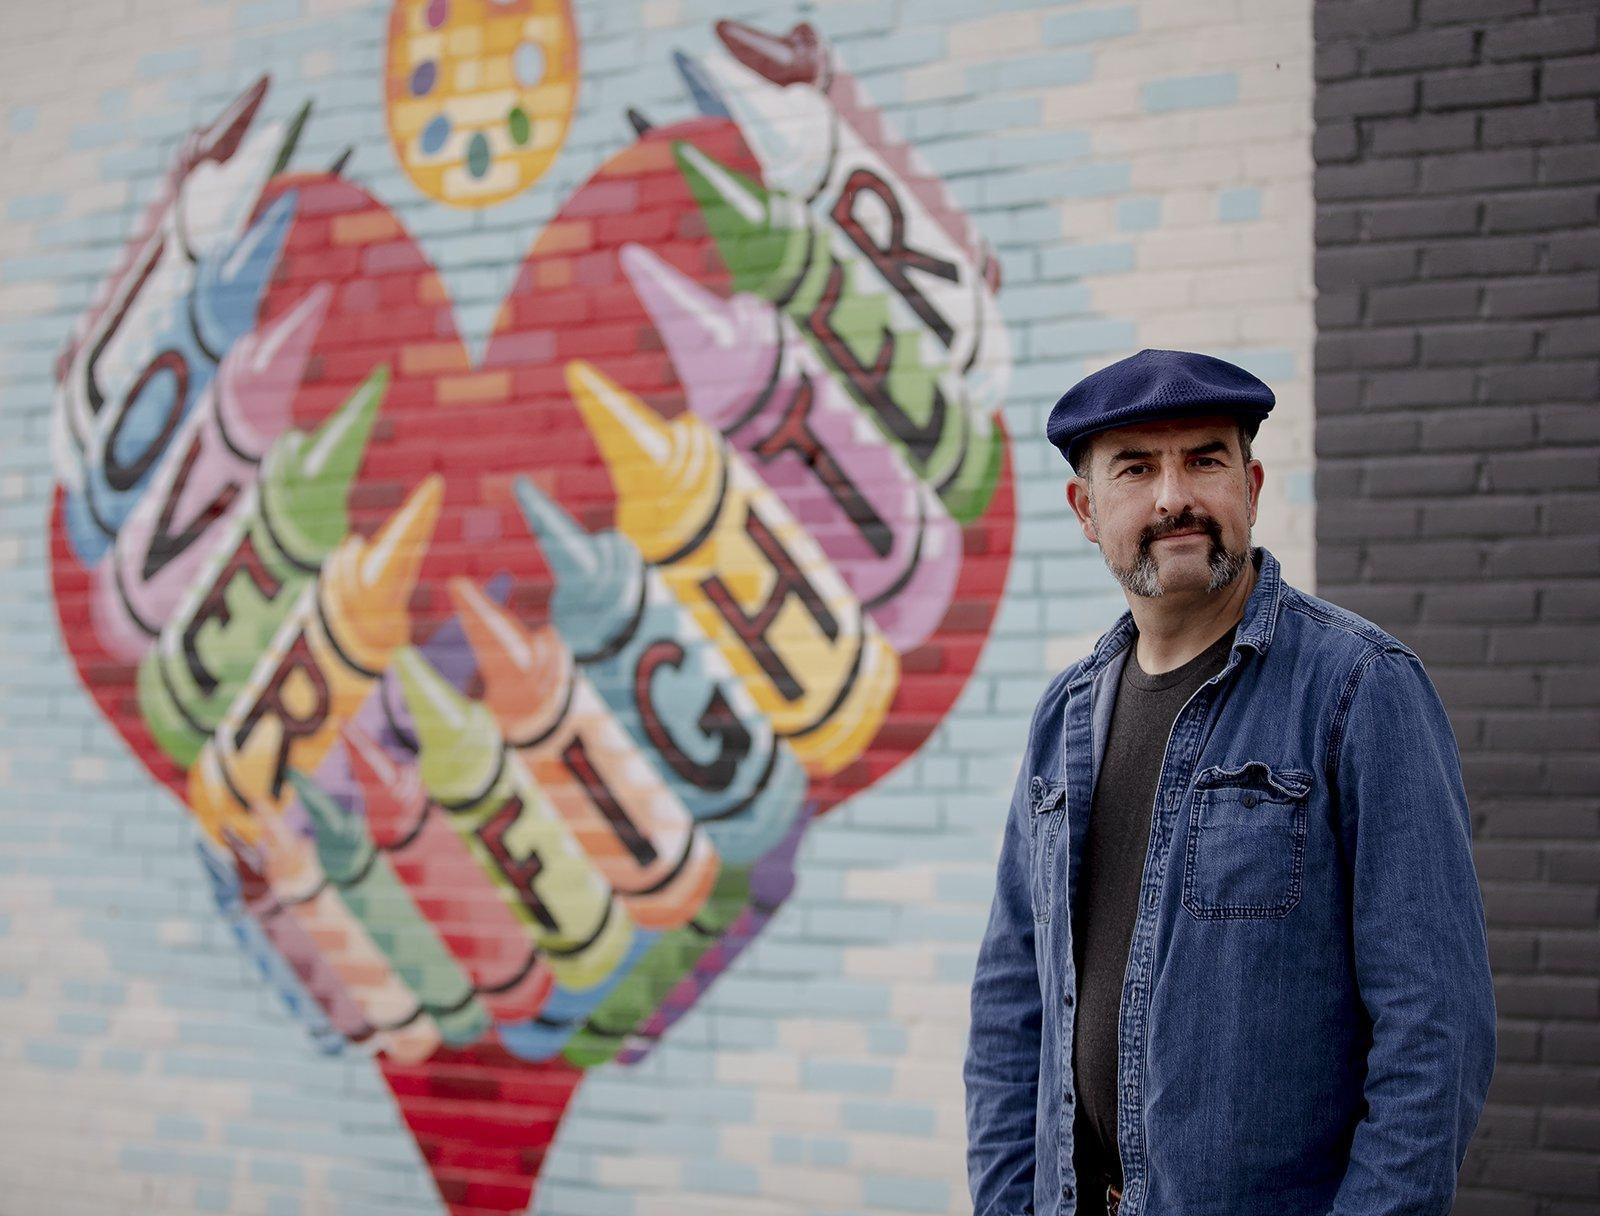 Artist Federico Archuleta, the man behind some of the most famous street art in Austin, poses for a photo Feb. 3 in front of his work "Lover, Fighter." [NICK WAGNER/AMERICAN-STATESMAN]